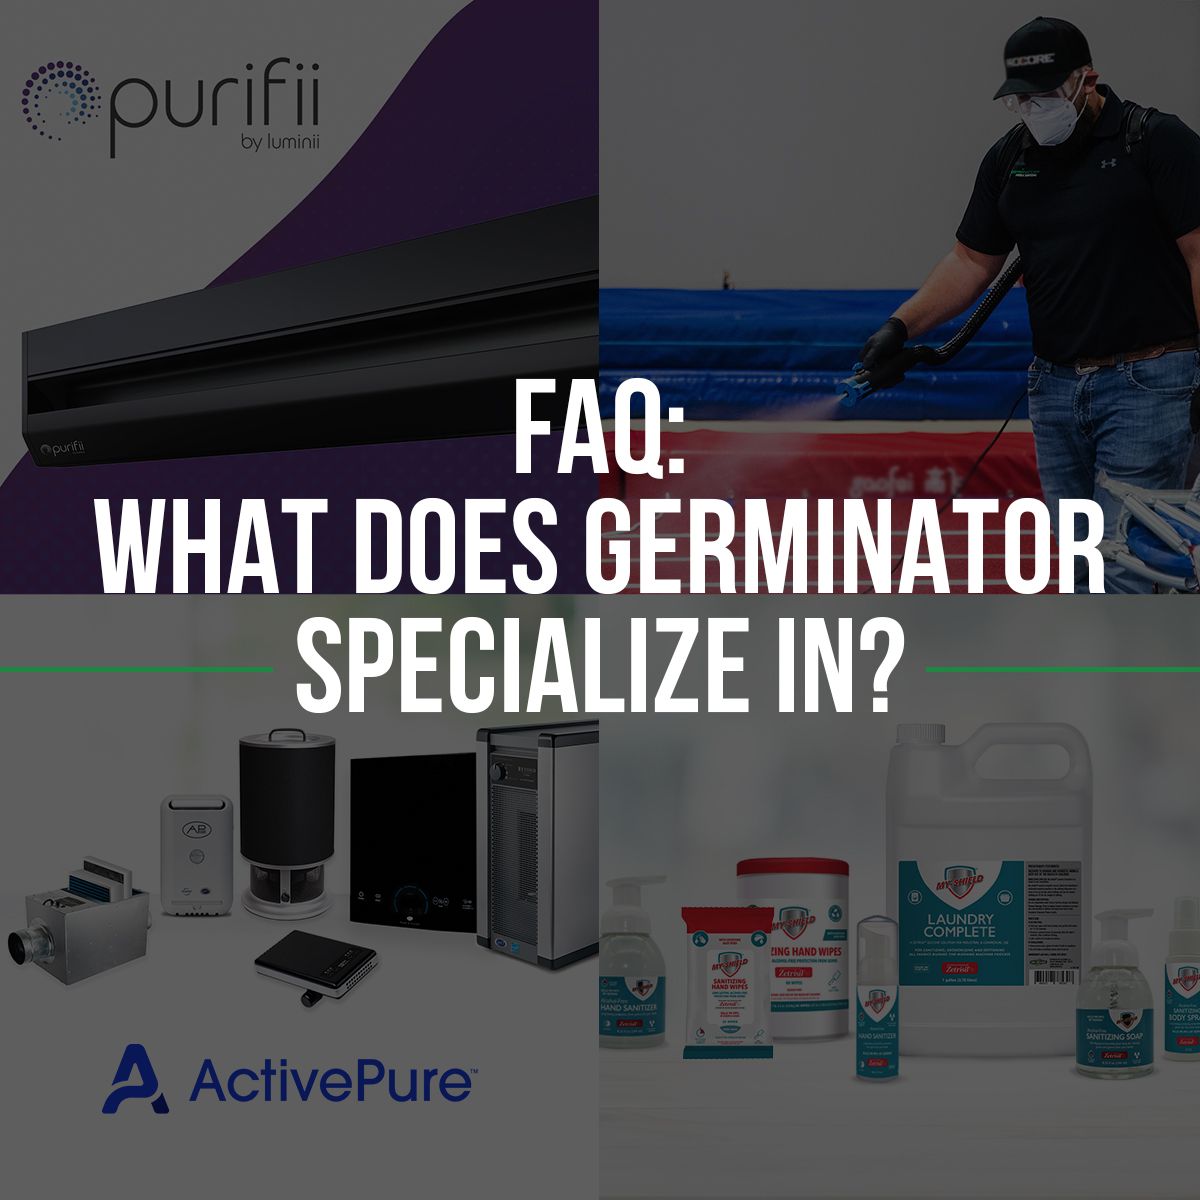 FAQ: What Does Germinator Specialize In?